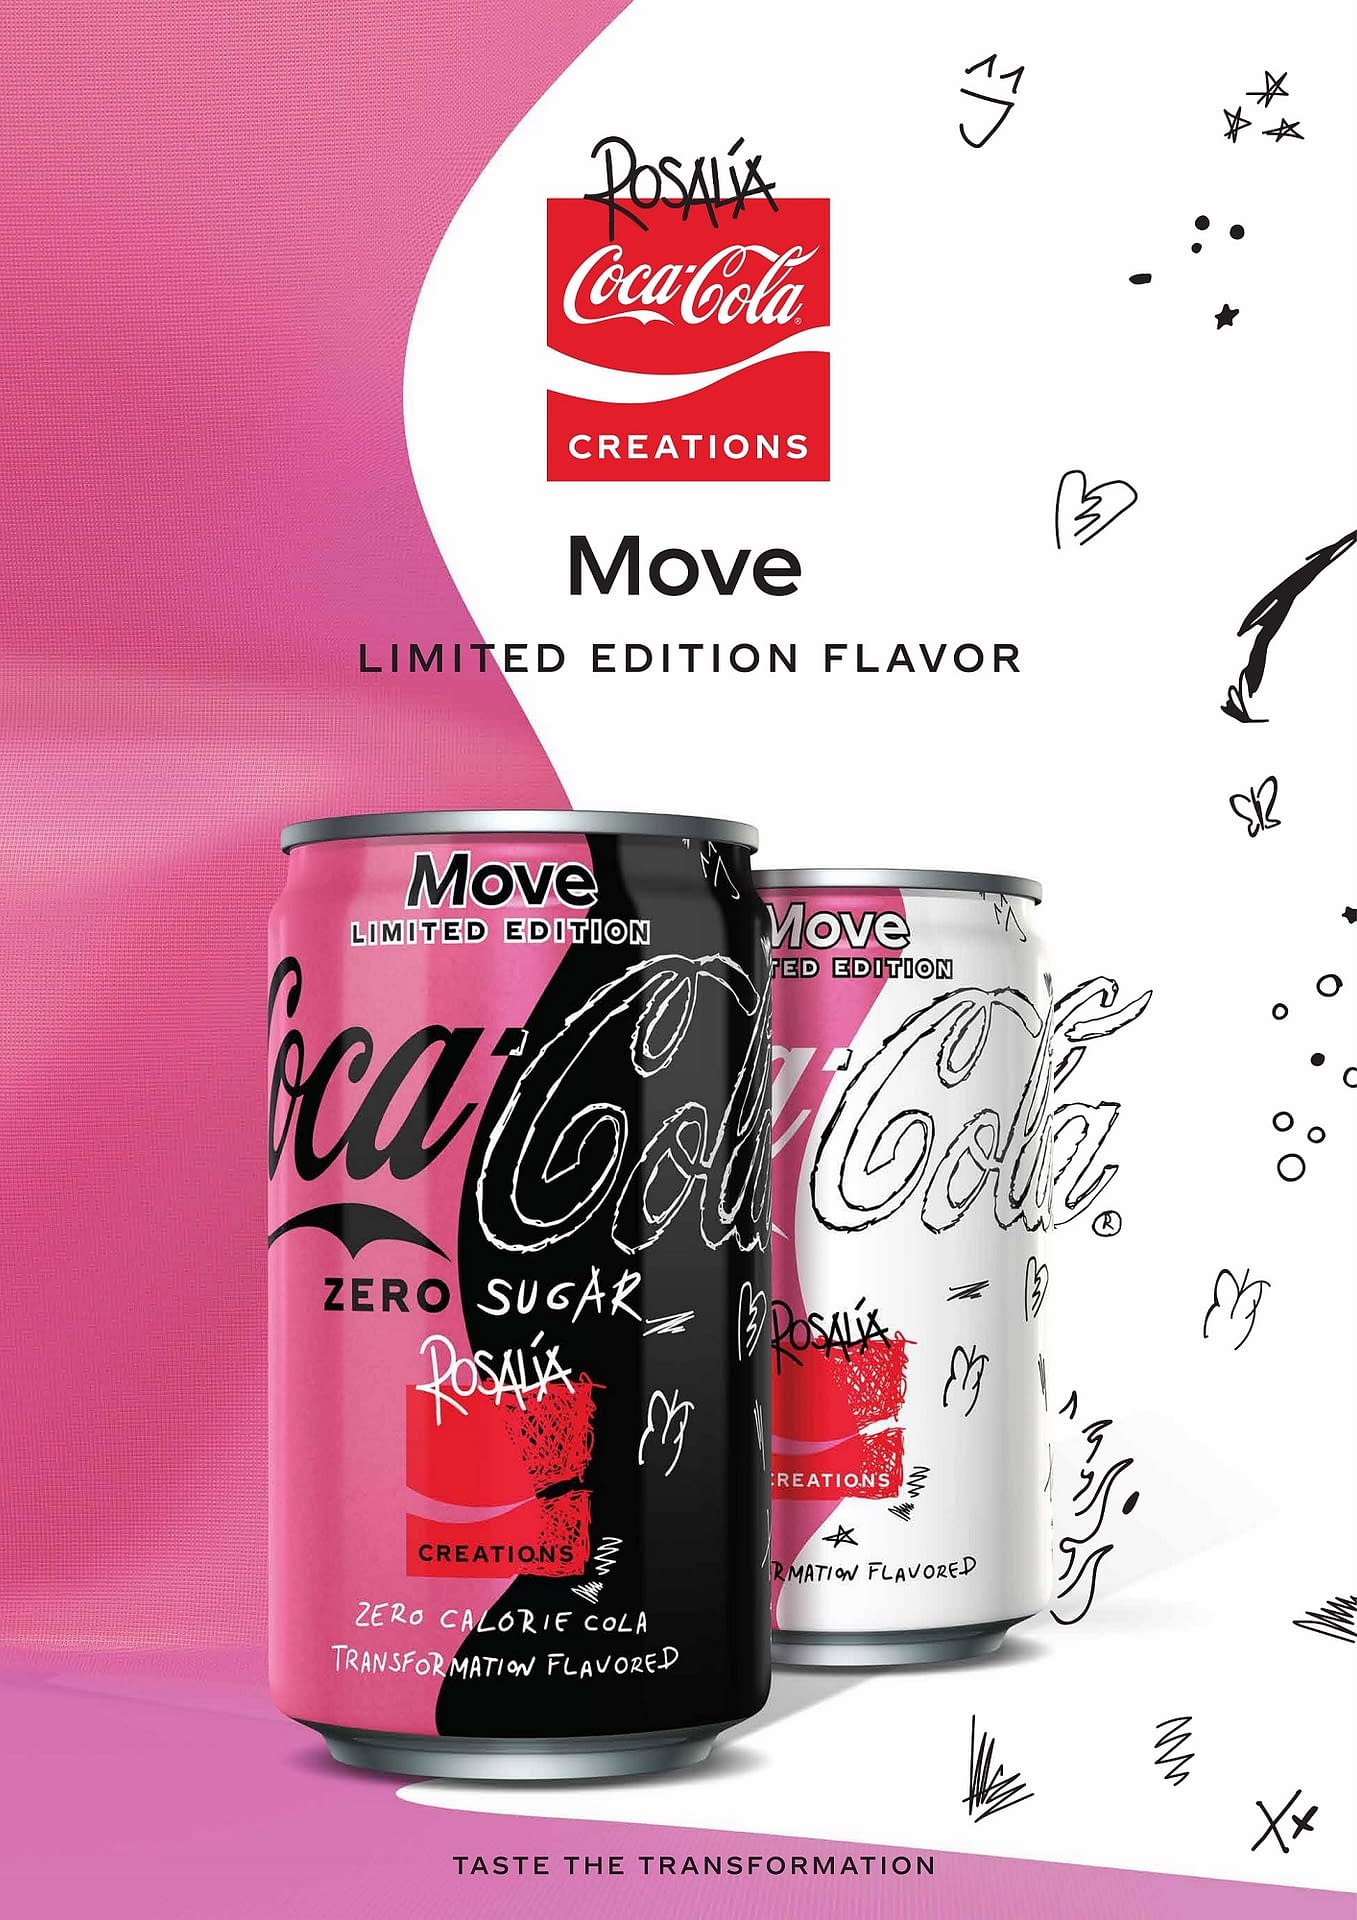 CocaCola Creations Announces New Move Flavor Featuring Rosalía